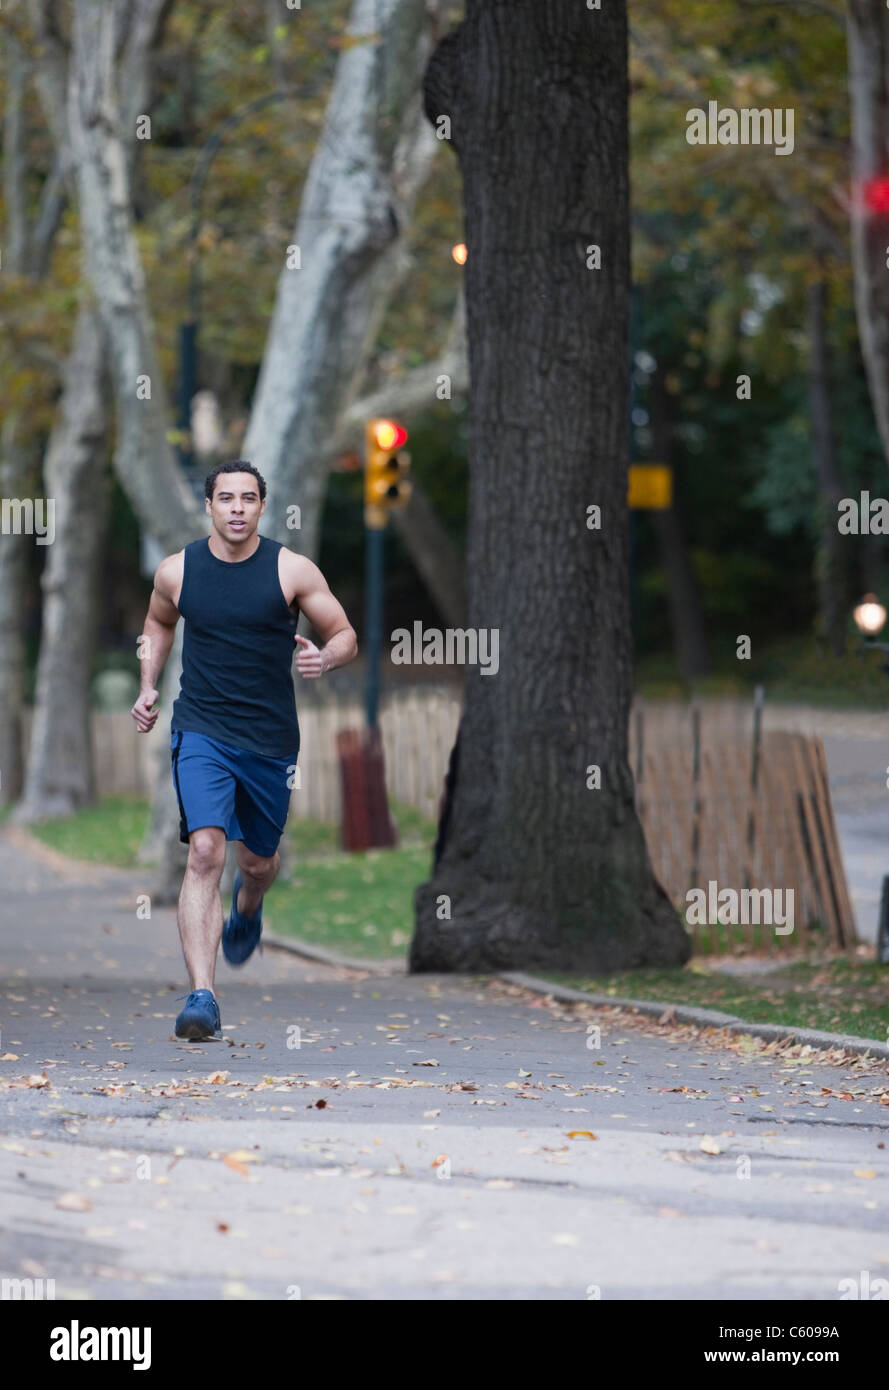 USA, New York, New York City, Young man jogging in park Stock Photo